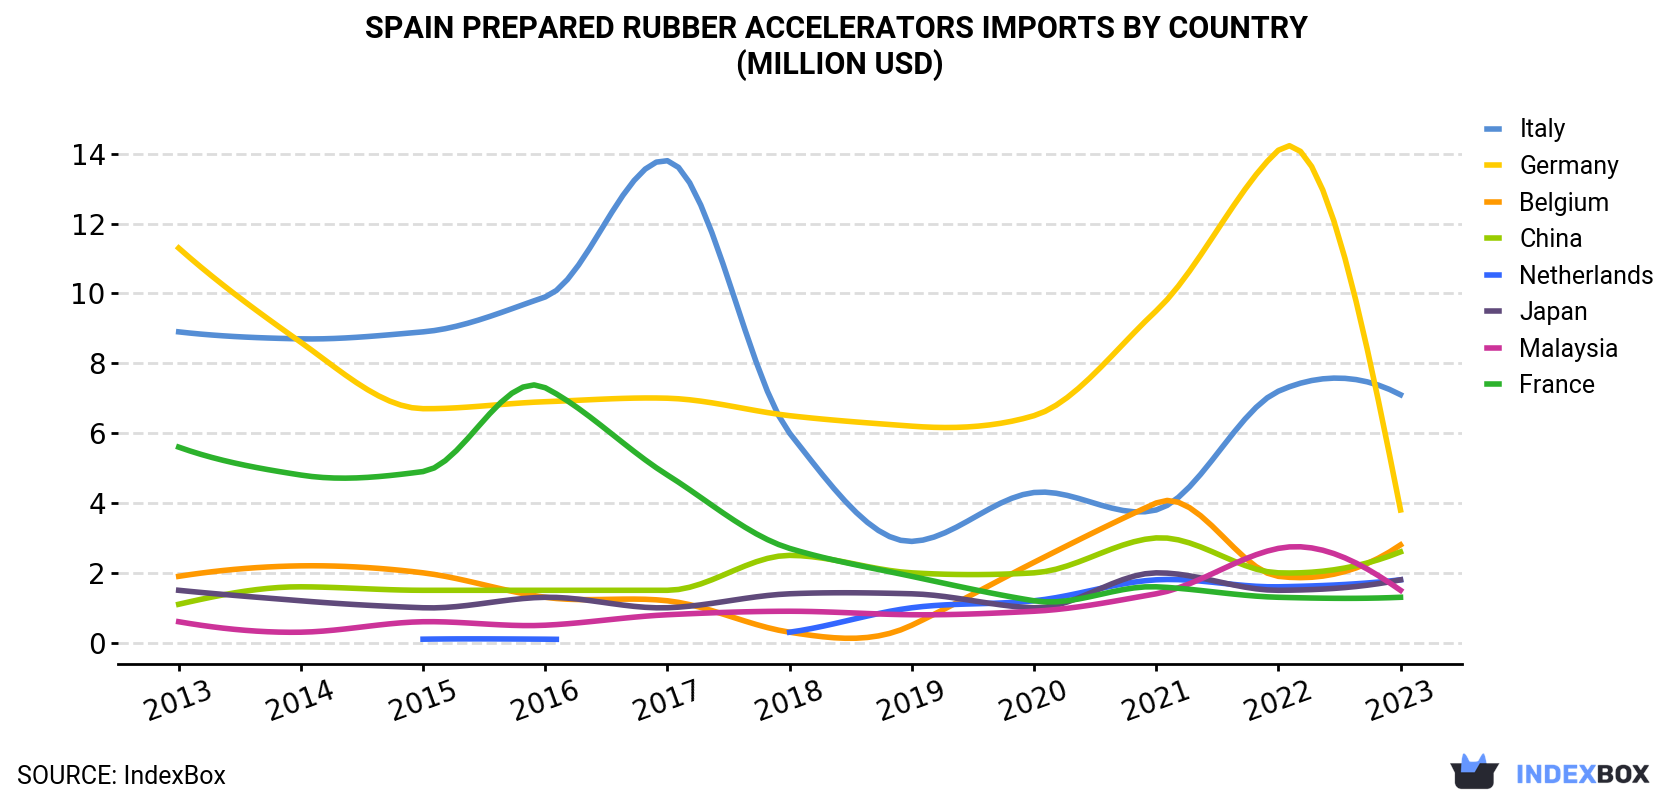 Spain Prepared Rubber Accelerators Imports By Country (Million USD)